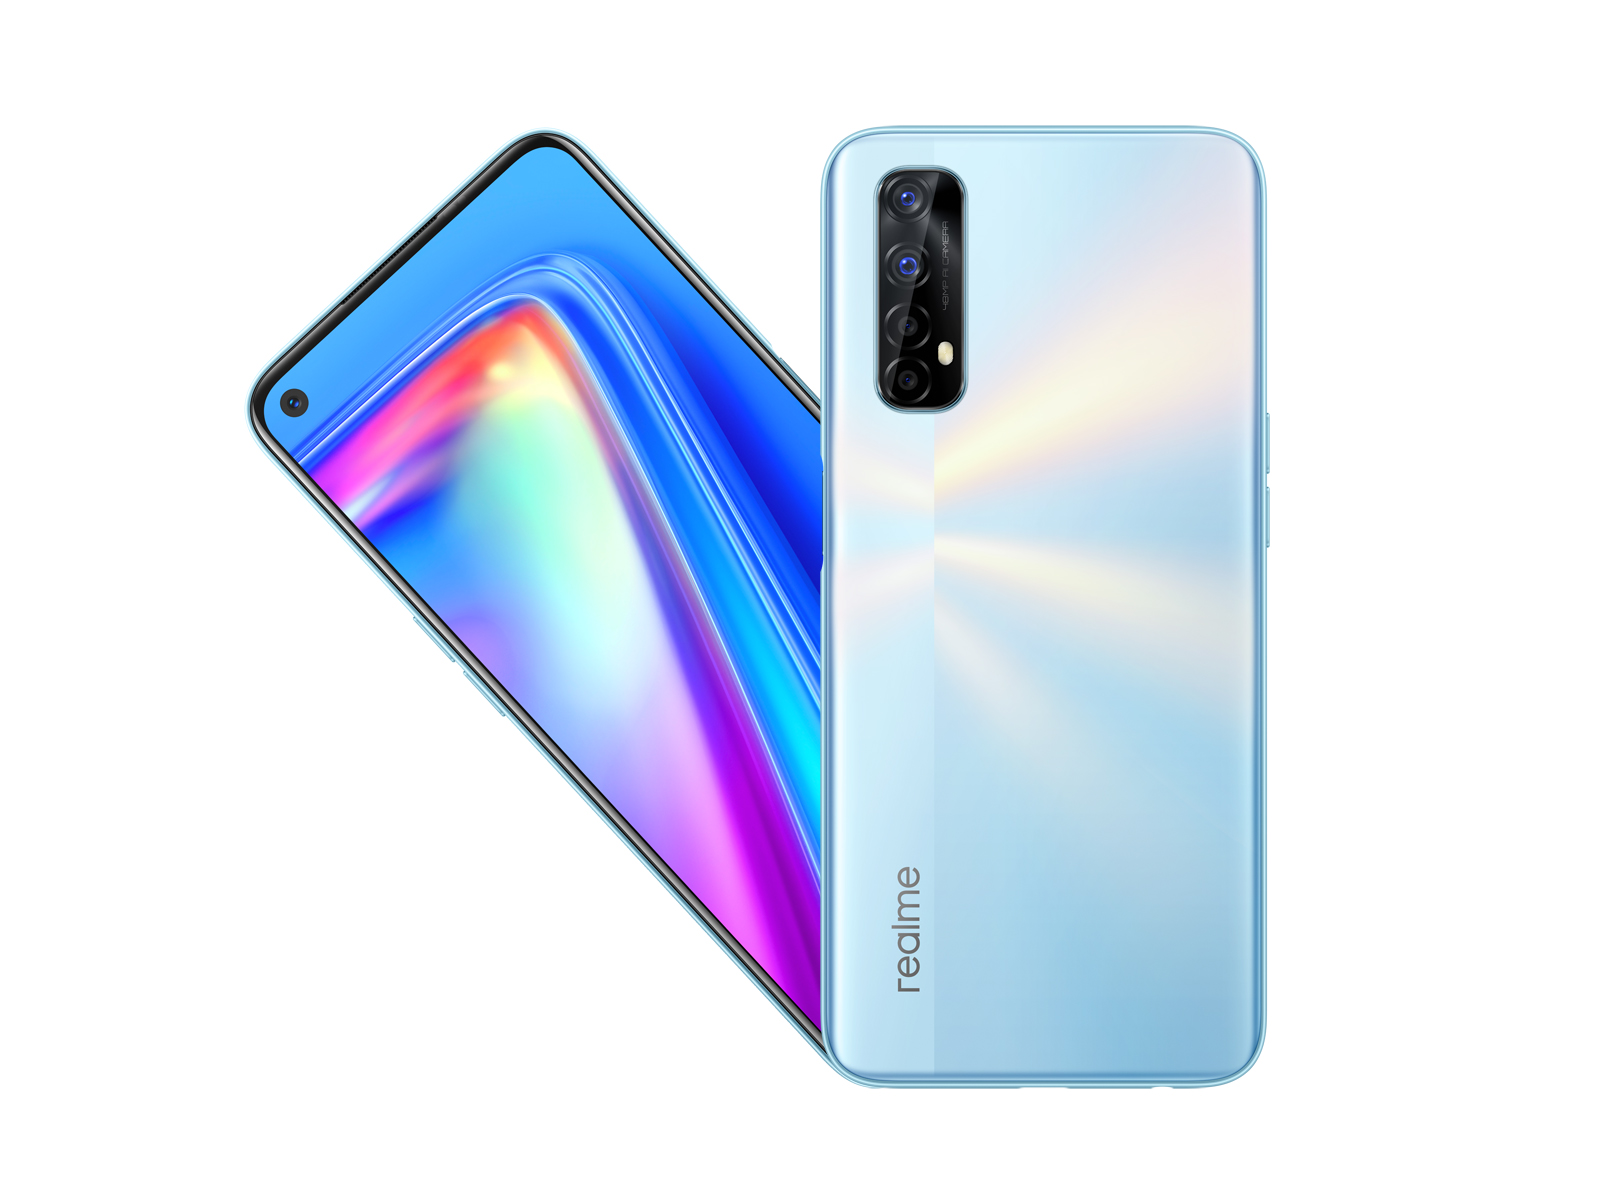 Realme 7 Smartphone Review - China phone with great performance for the  money -  Reviews